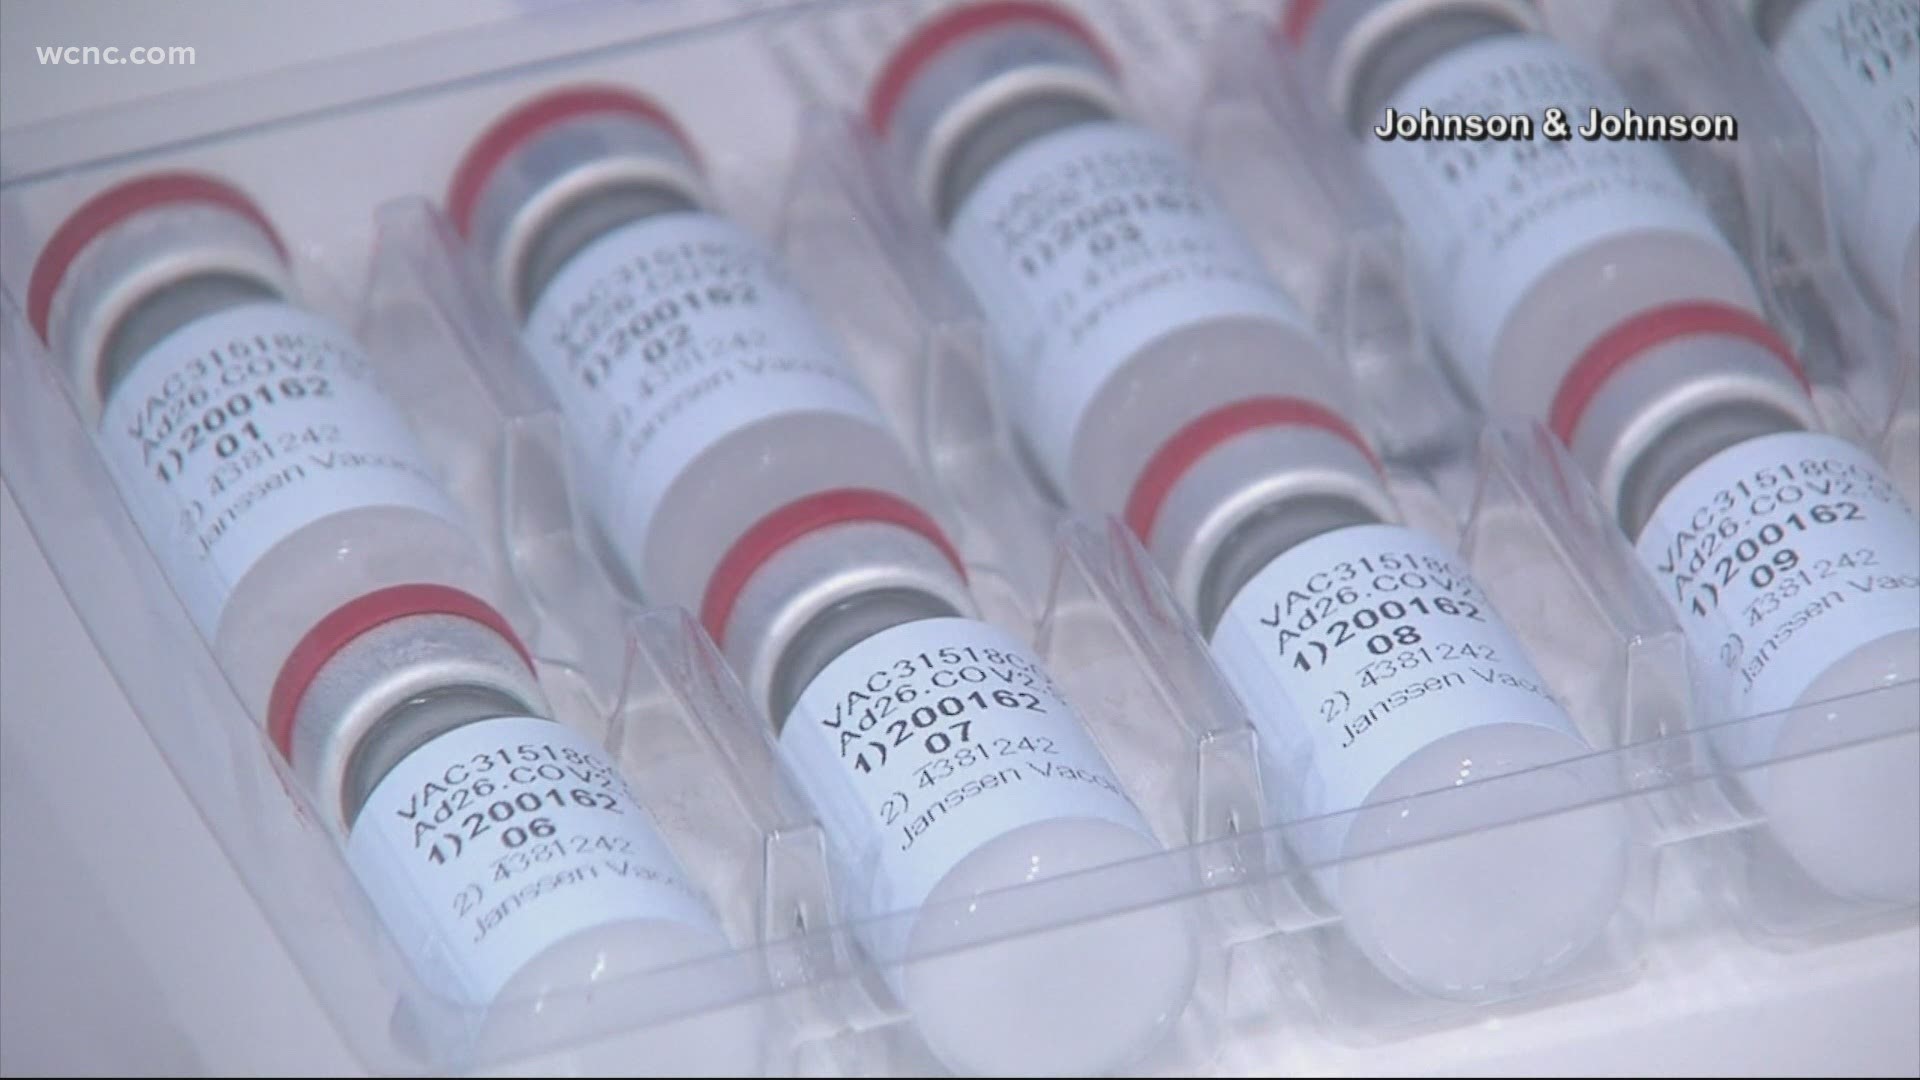 More than 80,000 doses are expected to arrive in the state this week, beginning on Wednesday.